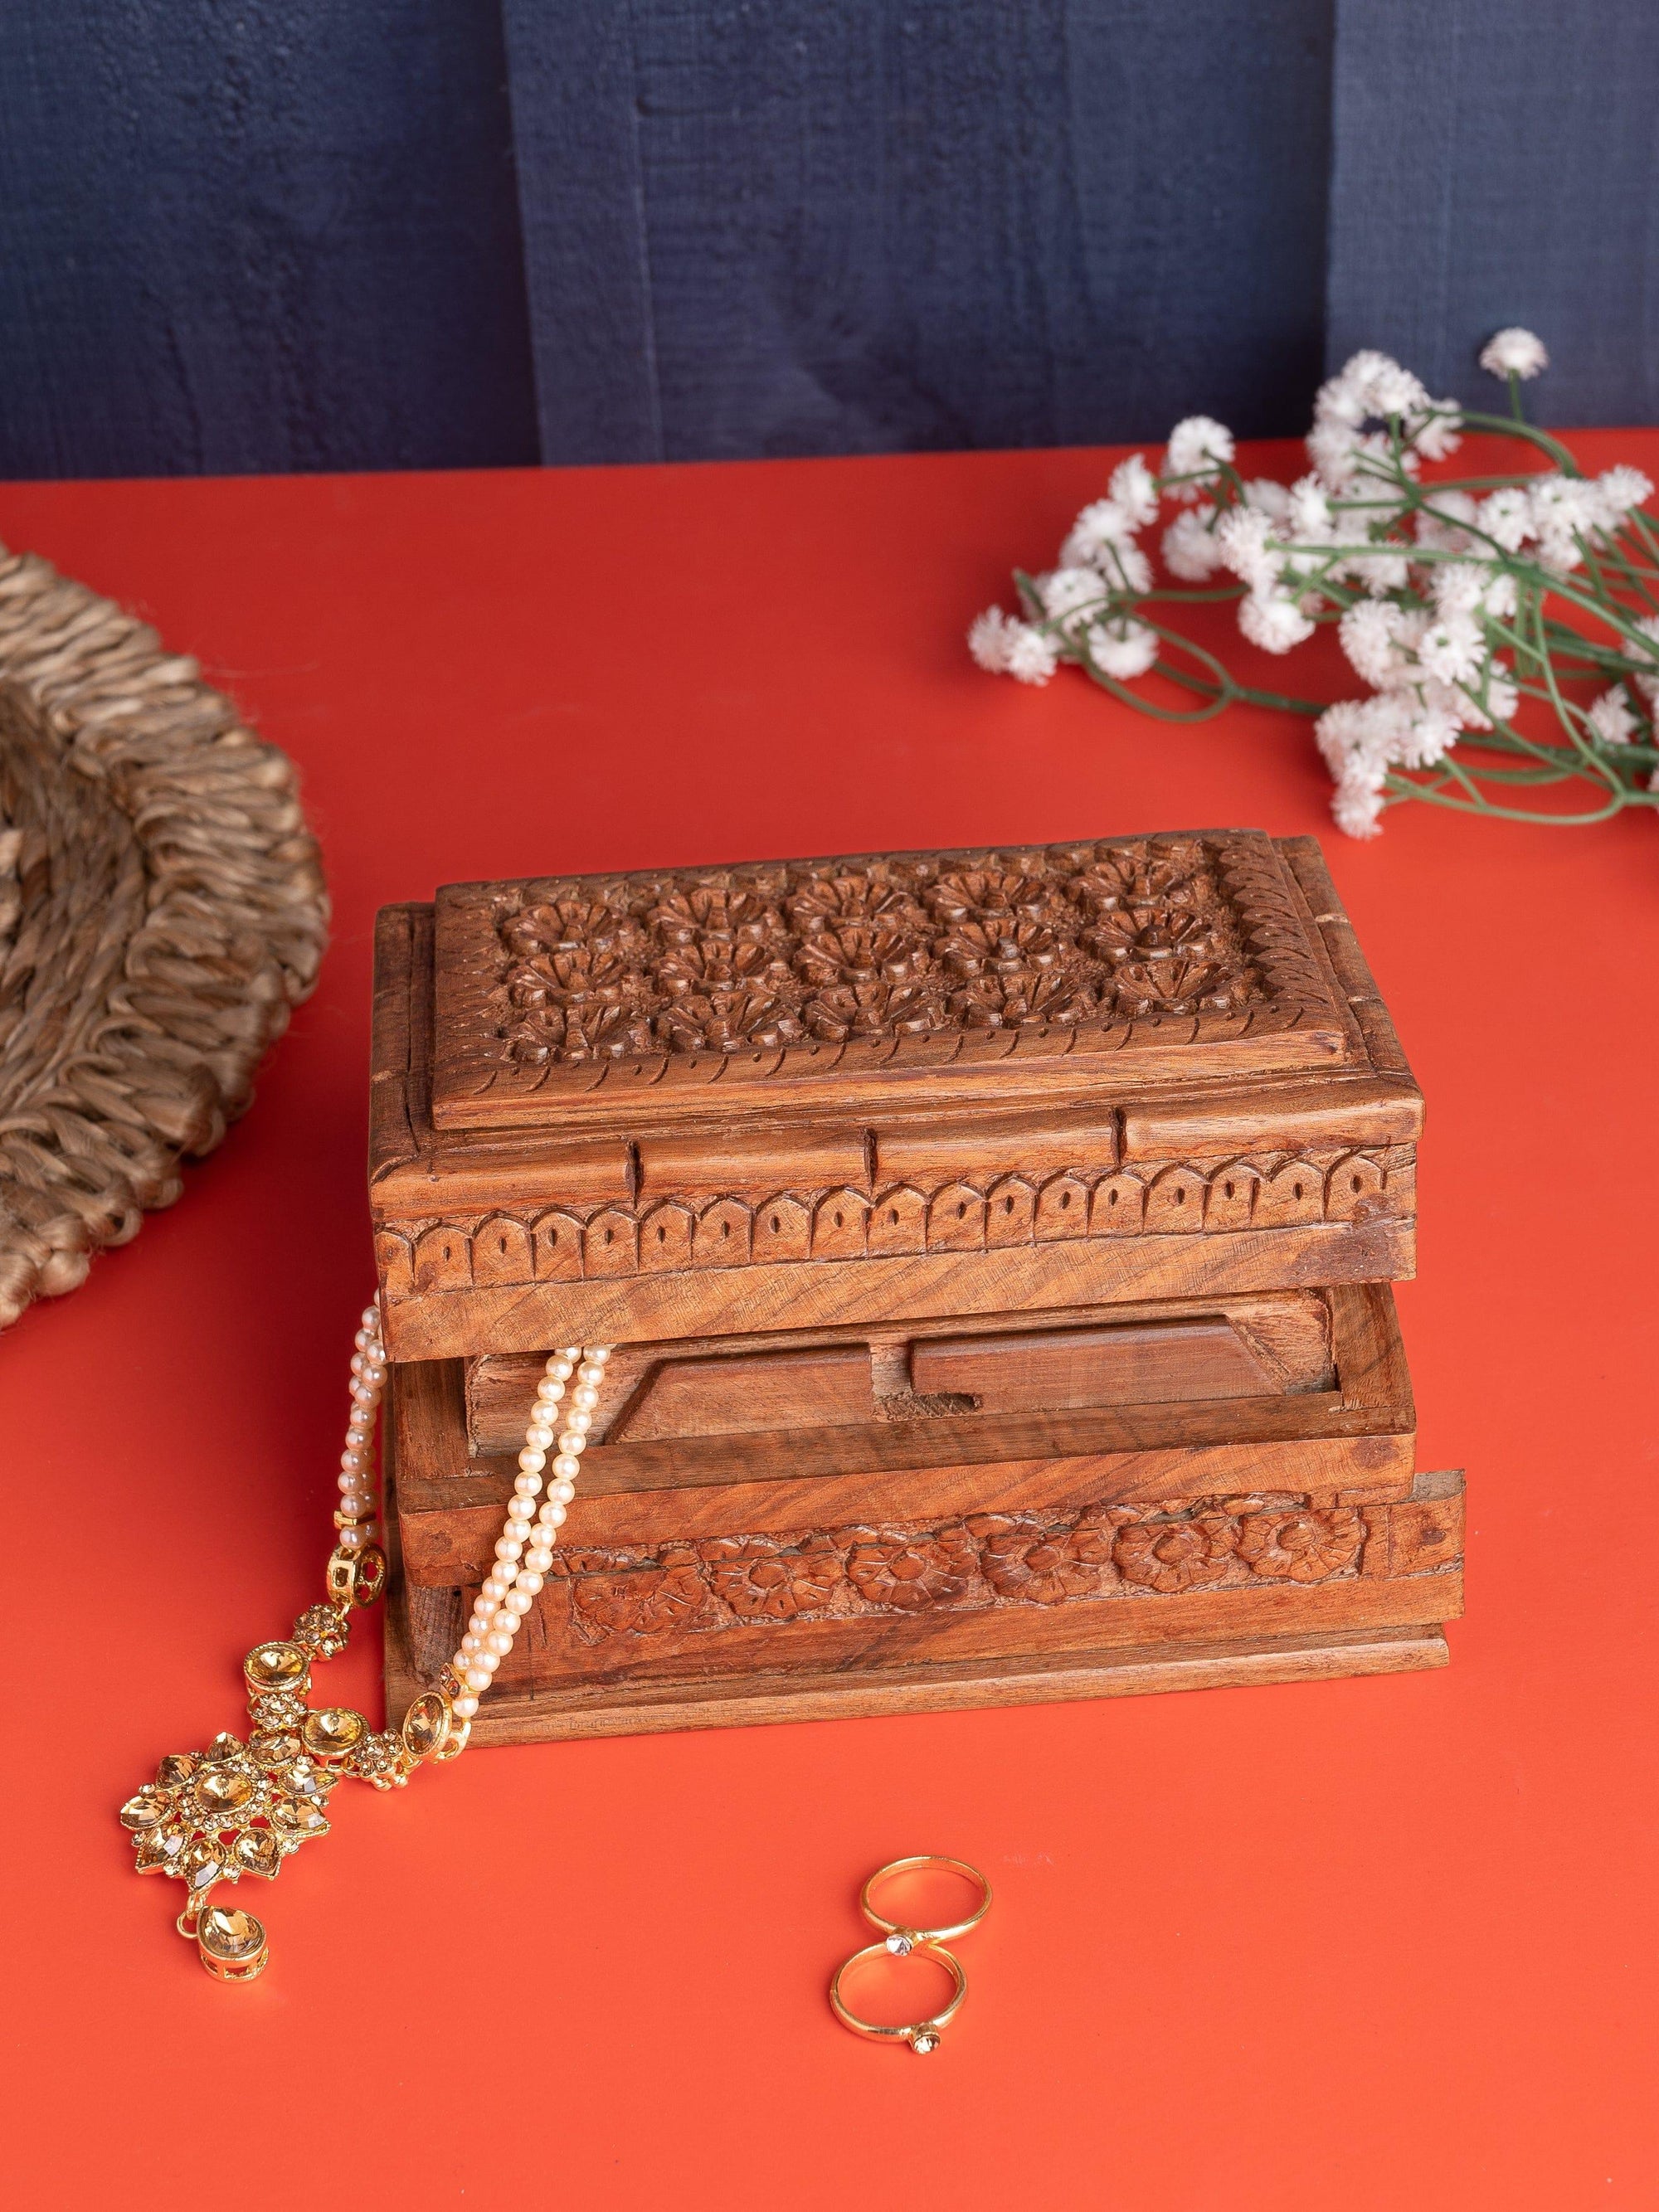 Walnut wood Rectangle Jewellery box with floral motif carving on top - 6x4 inches - The Heritage Artifacts